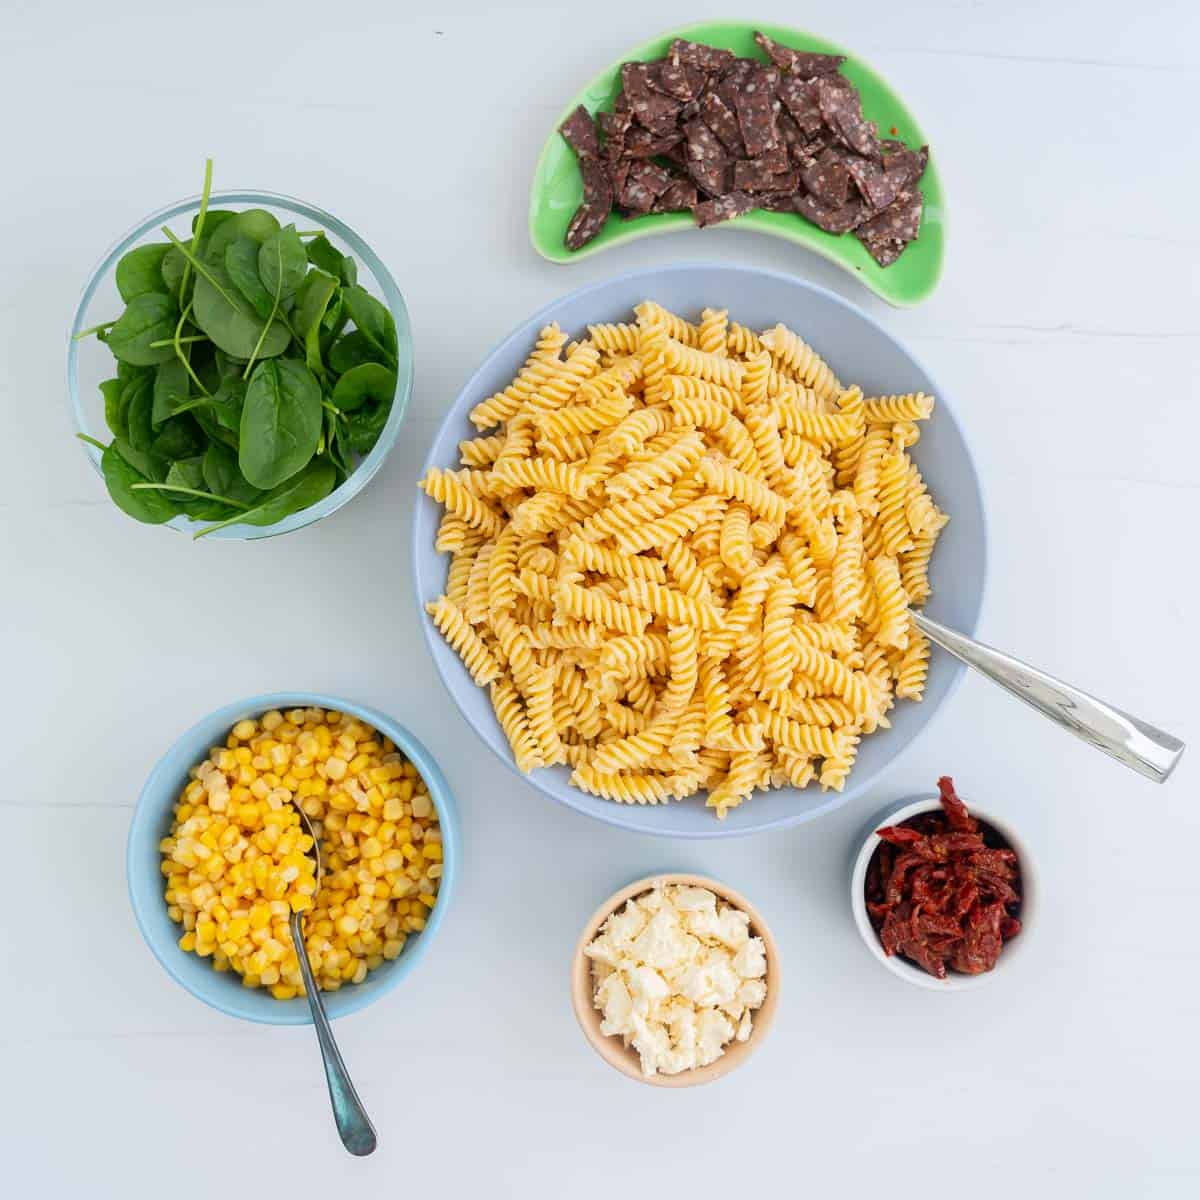 A bowl of dressed pasta surrounded by small bowls of feta, sundried tomatoes, corn, spinach leaves and salami.